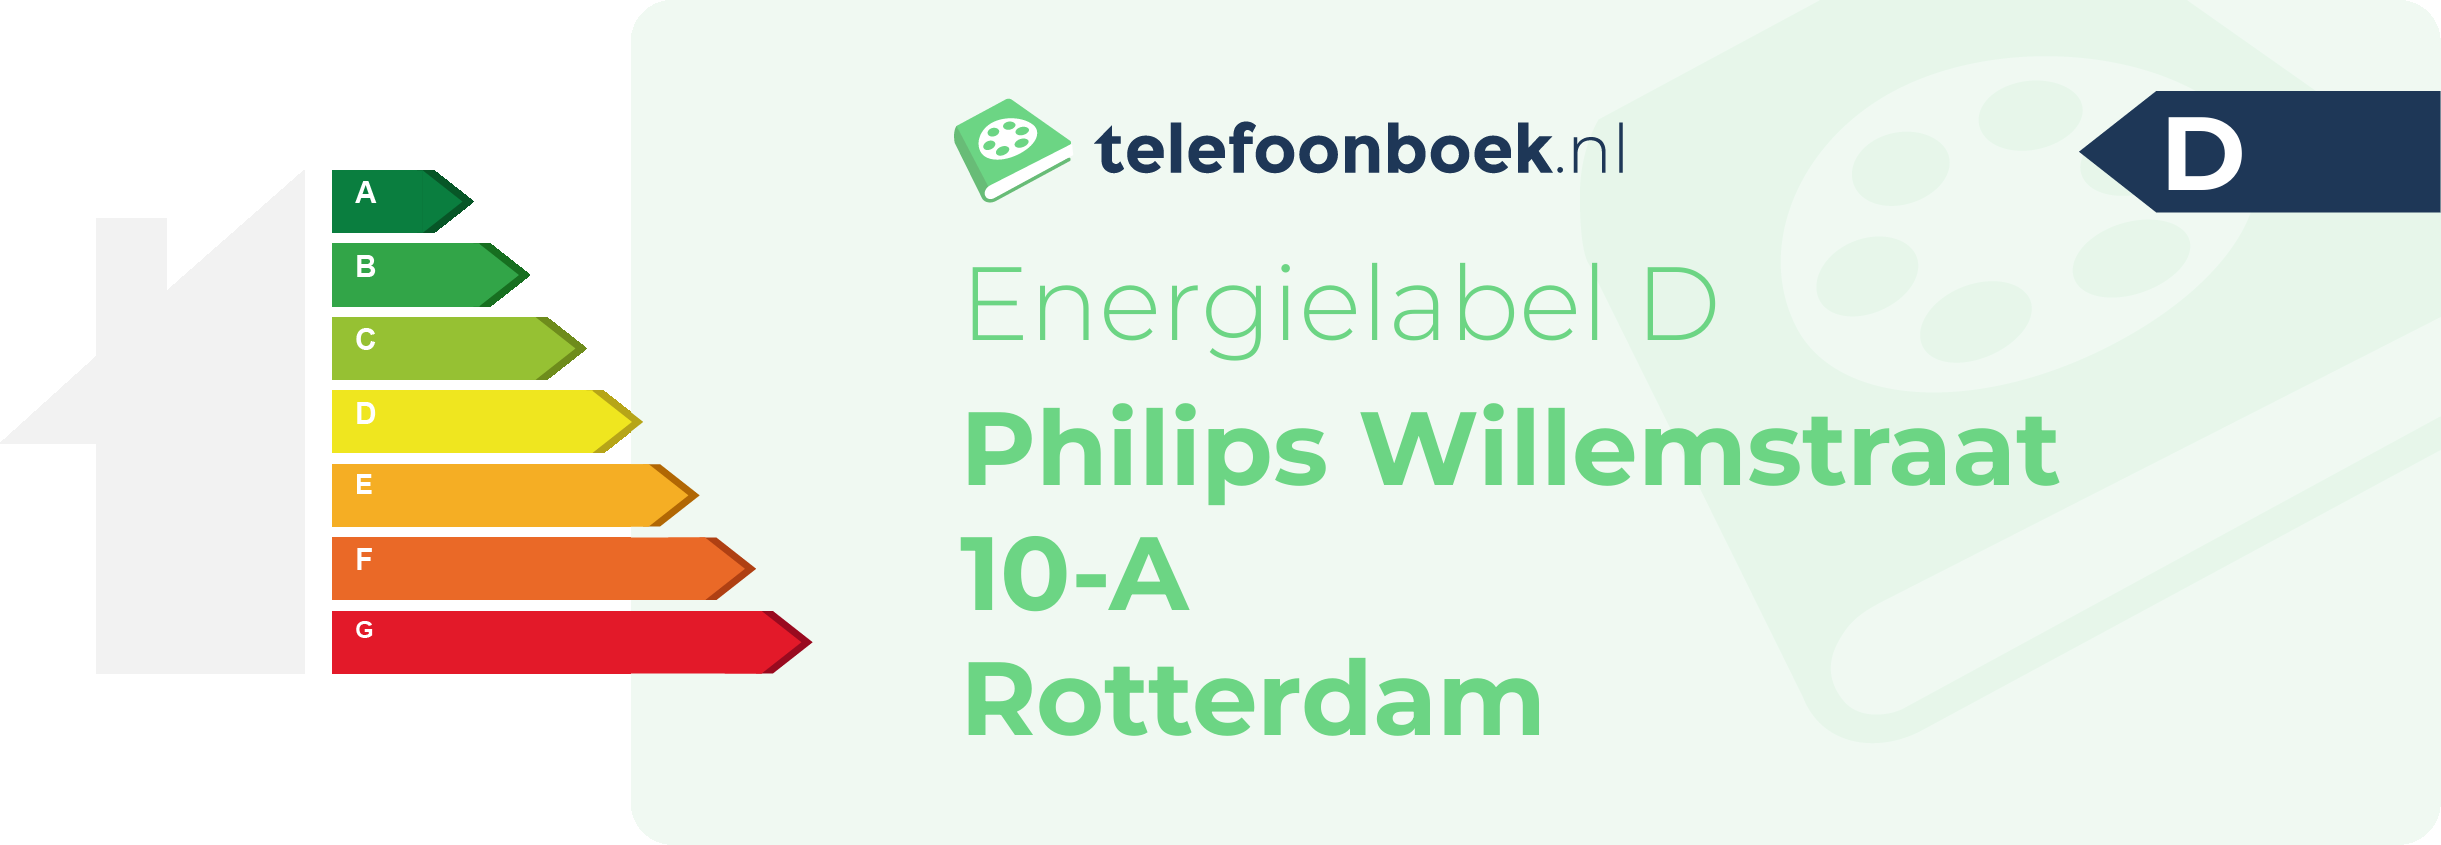 Energielabel Philips Willemstraat 10-A Rotterdam